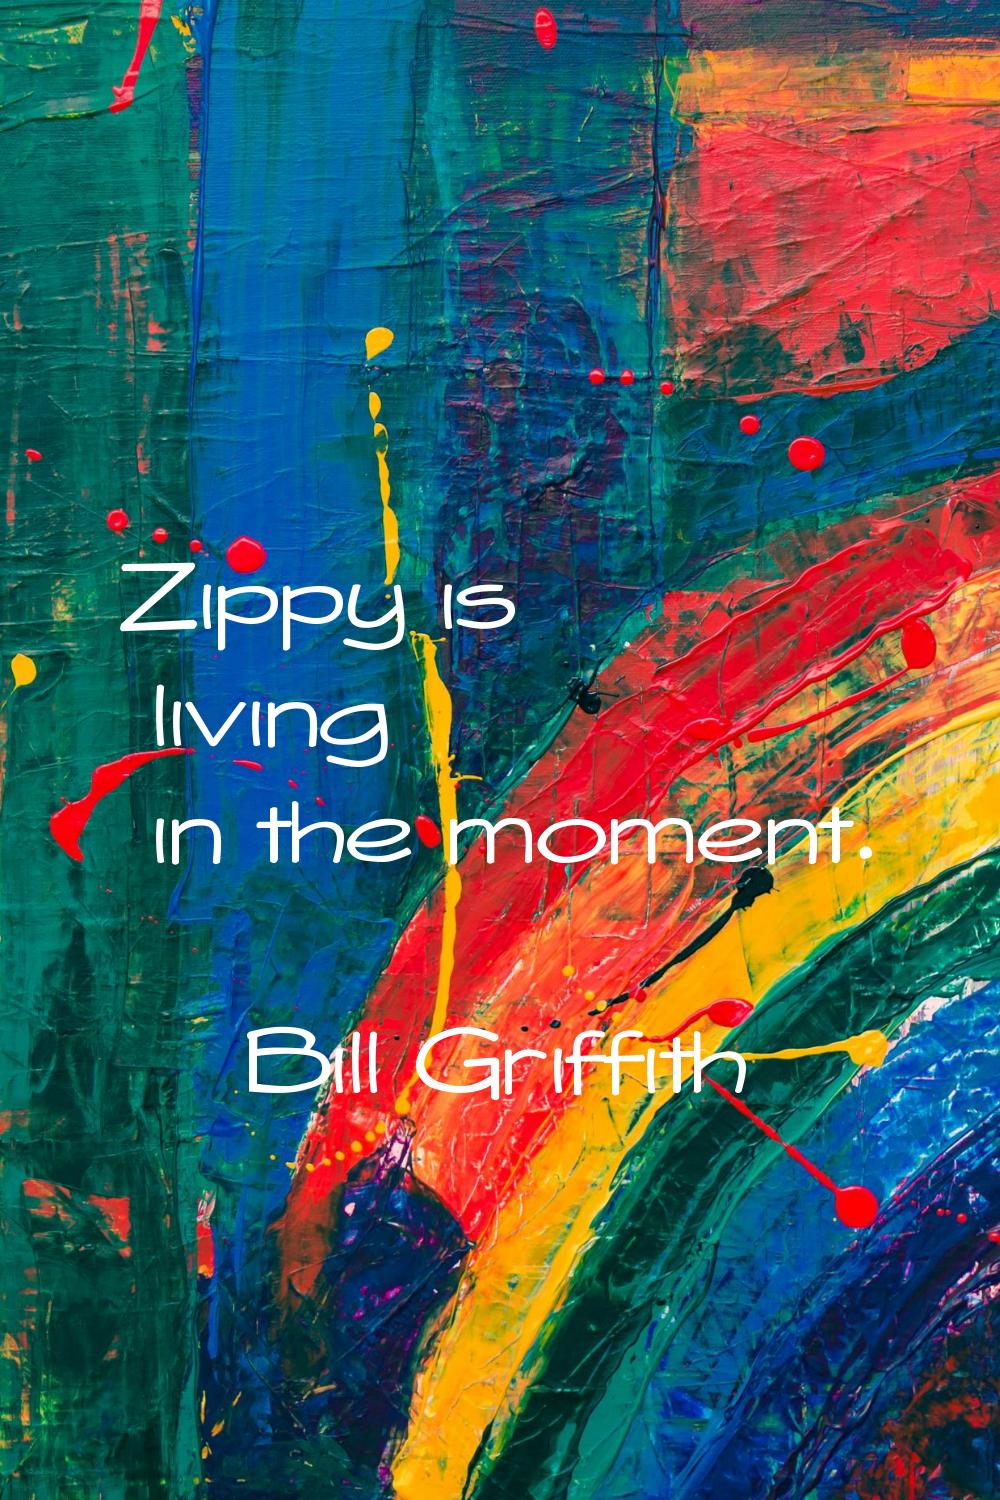 Zippy is living in the moment.